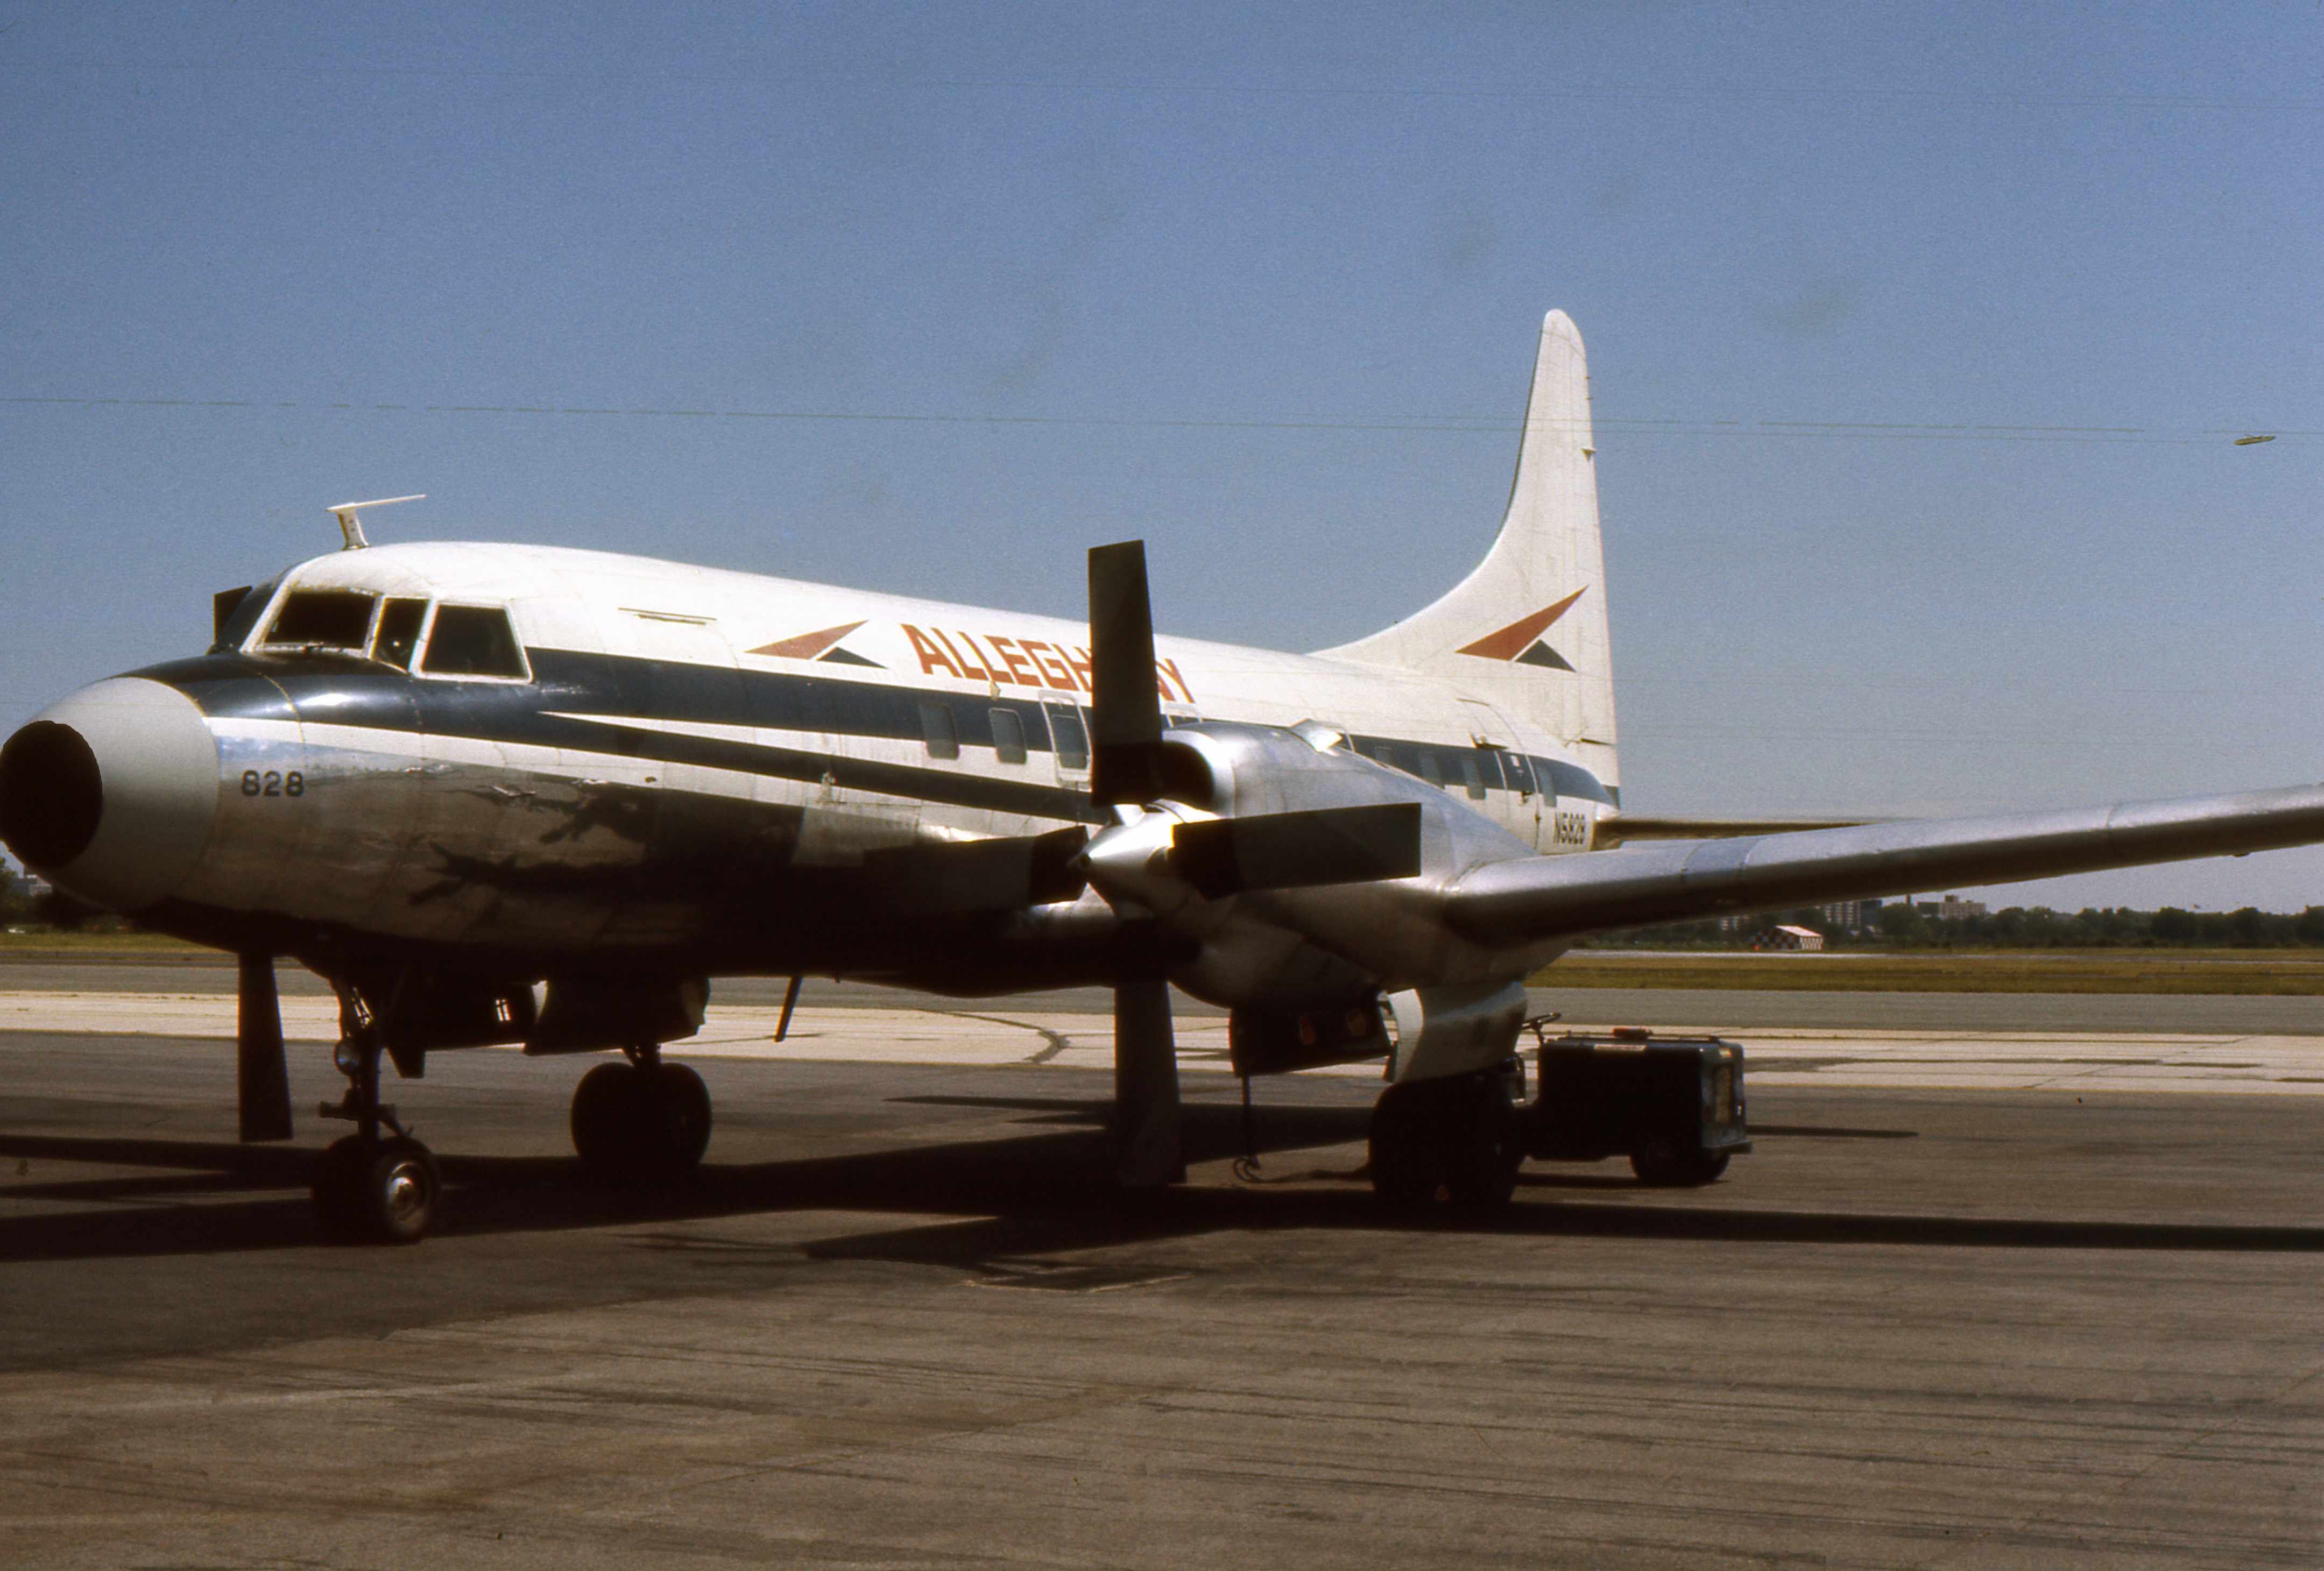 An Allegheny Airlines Convair CV-580 on an airport apron.